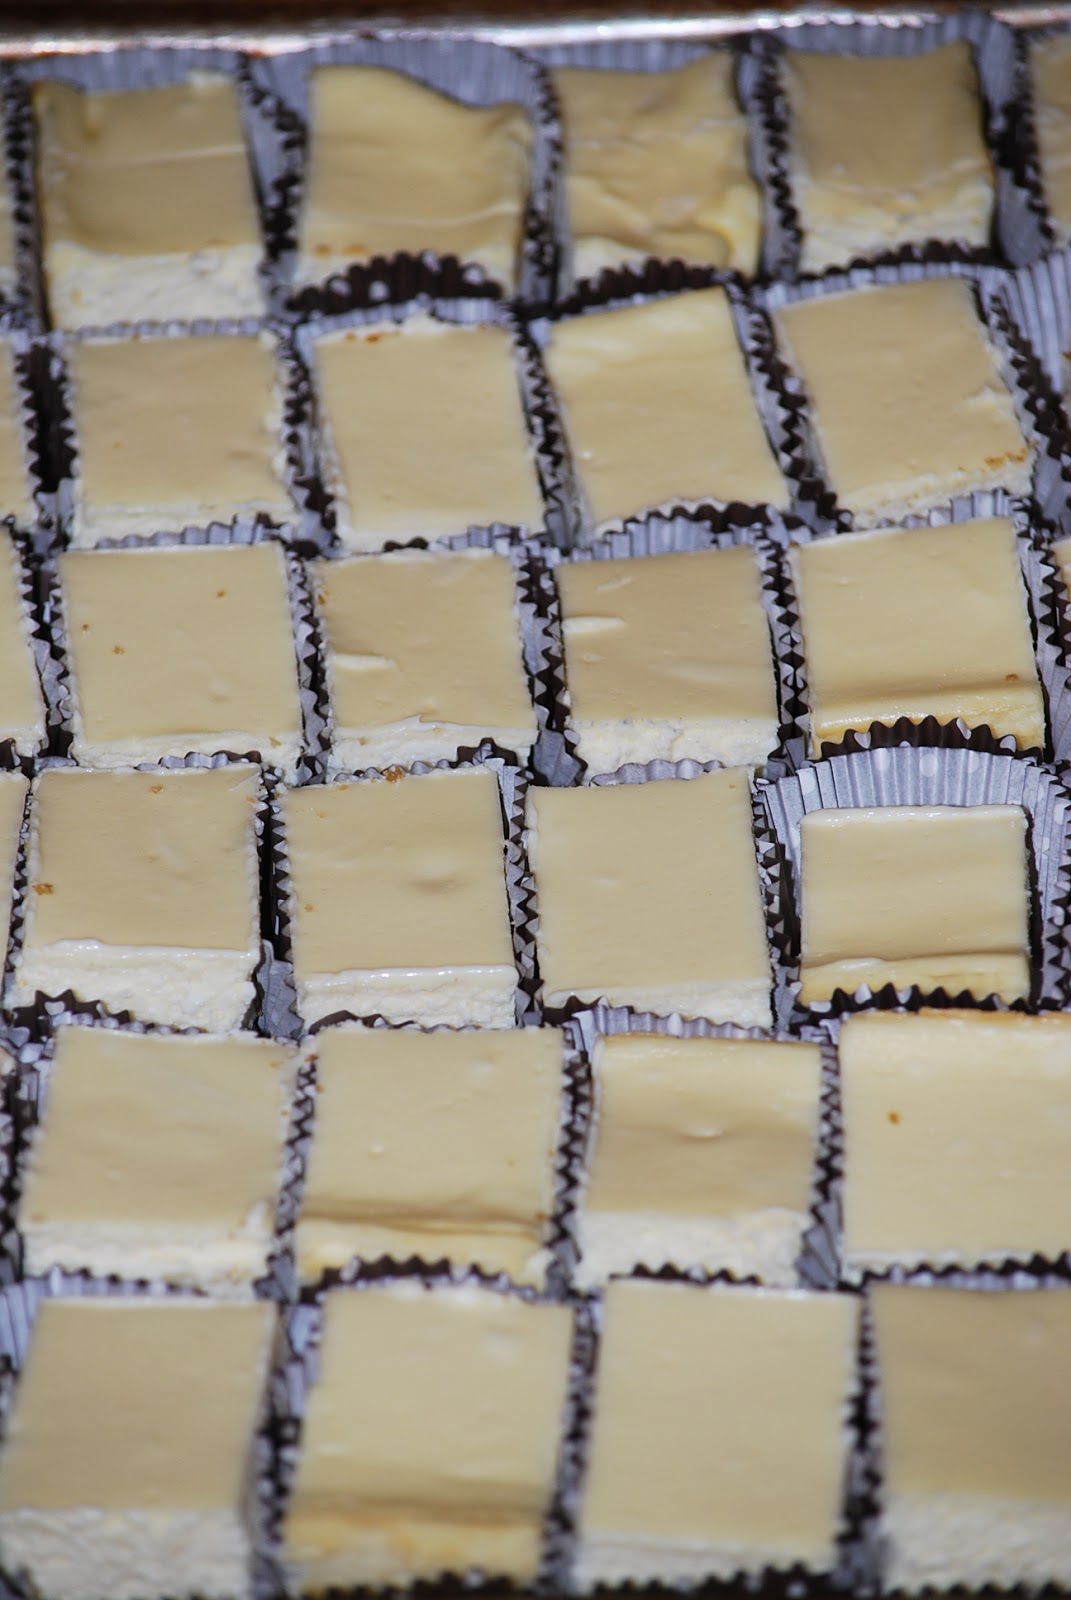 My story in recipes: Cheesecake Squares